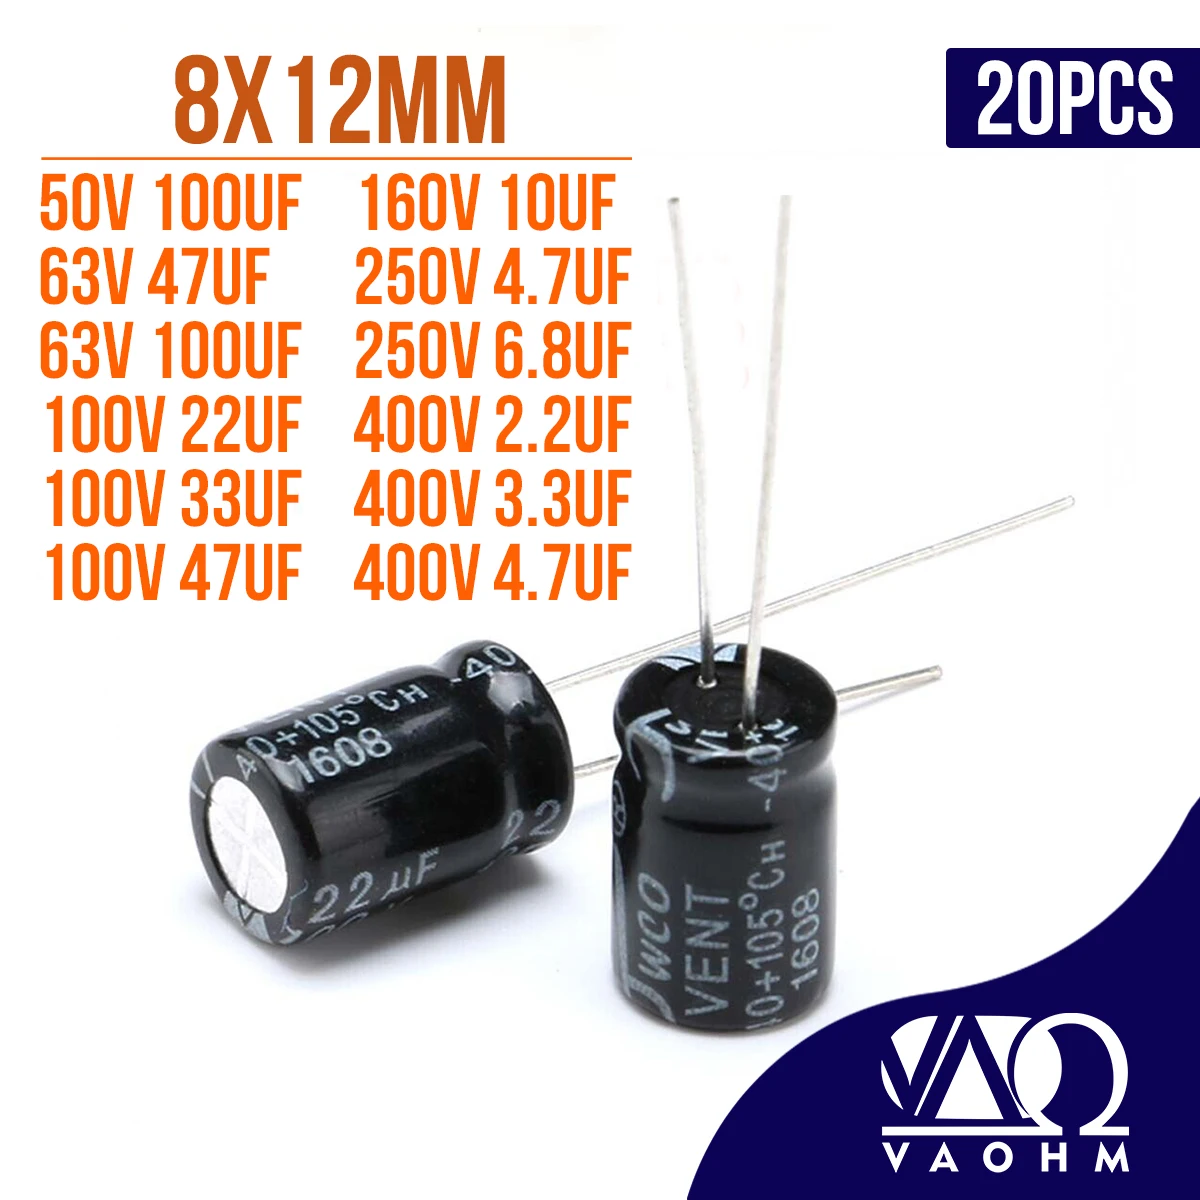 

20PCS 2.2UF 3.3UF 4.7UF 10UF 22UF 33UF 47UF 100UF 50V 63V 100V 160V 250V 400V Aluminum Electrolytic Capacitor 8X12MM